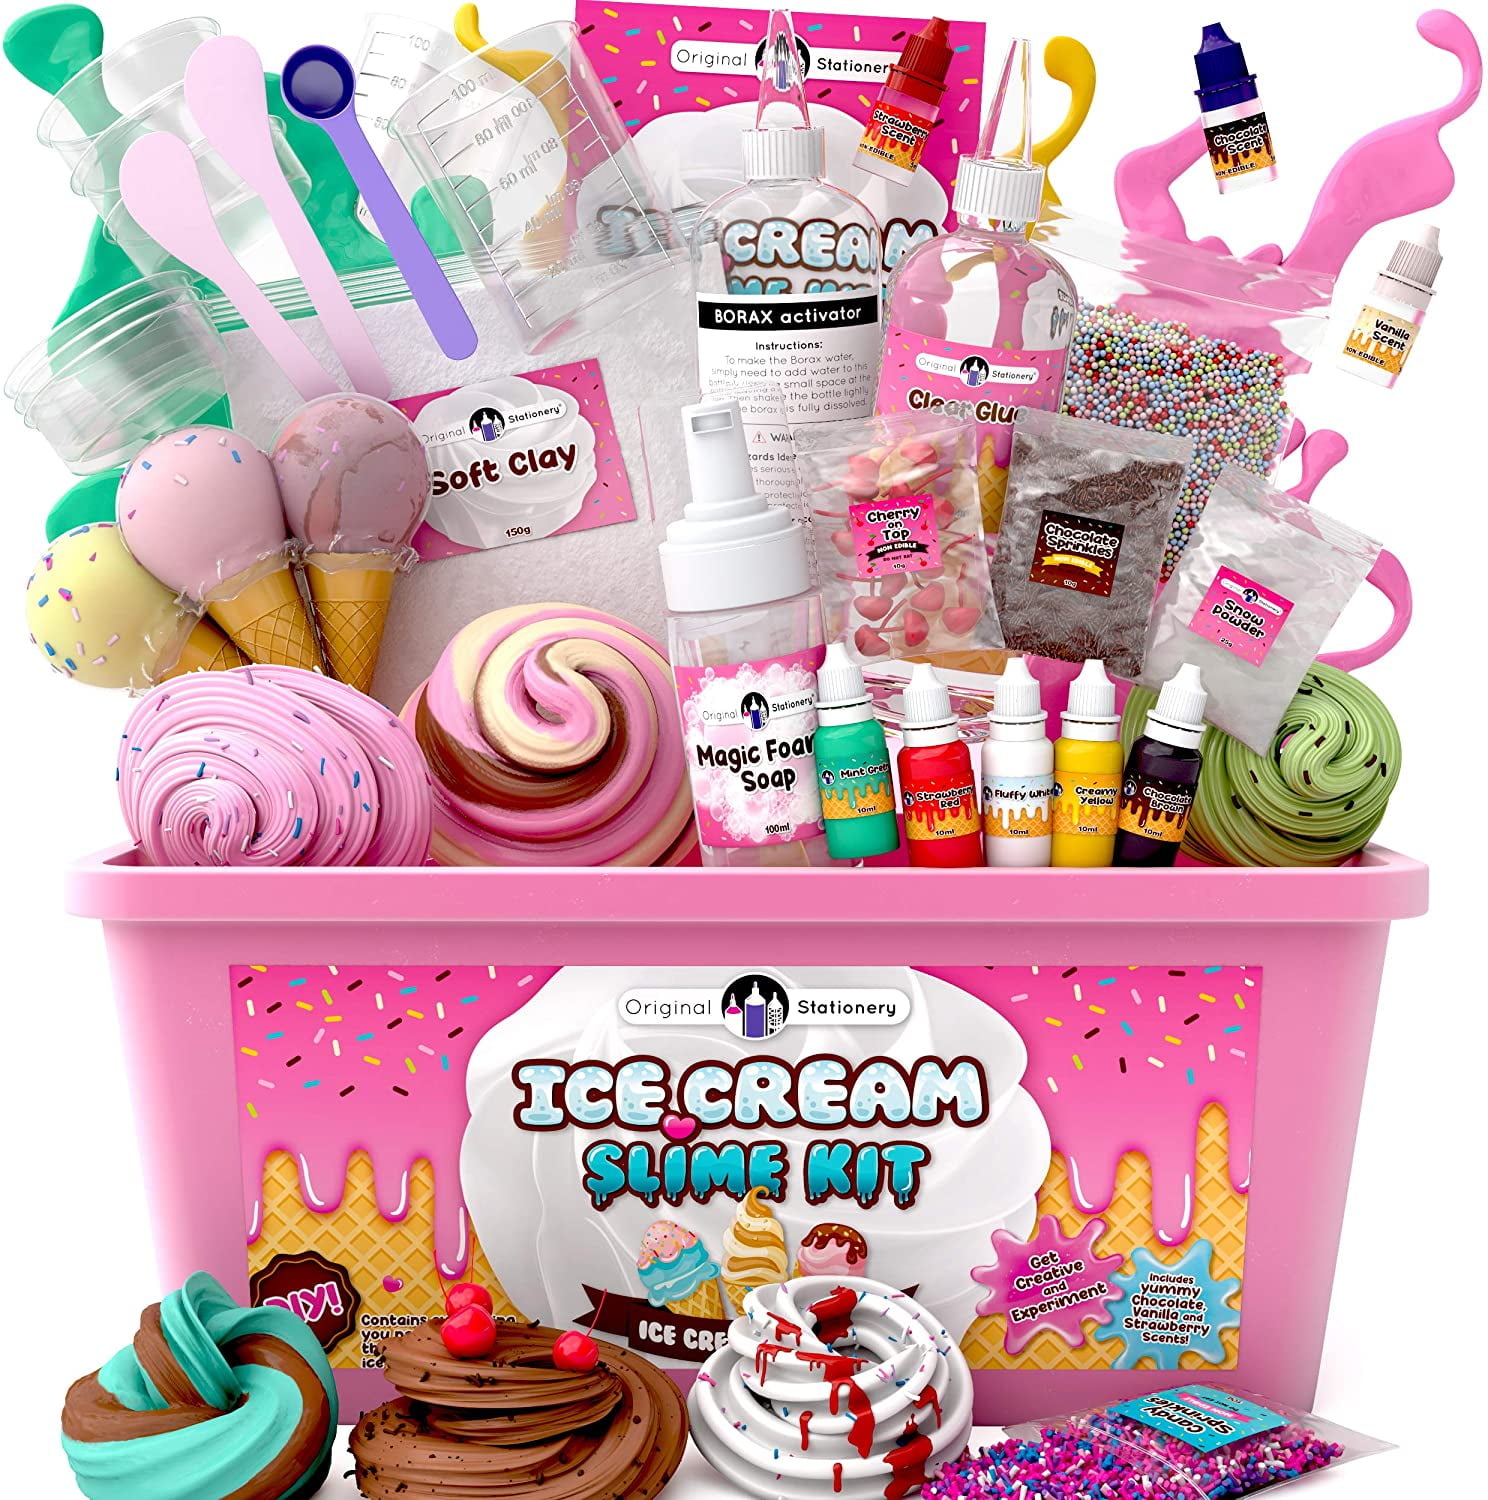 Original Stationery Fluffy Slime Kit for Girls Everything in One Box to  Make Ice Cream Slimes, Make Fluffy, Butter, Cloud & Foam Slimes!